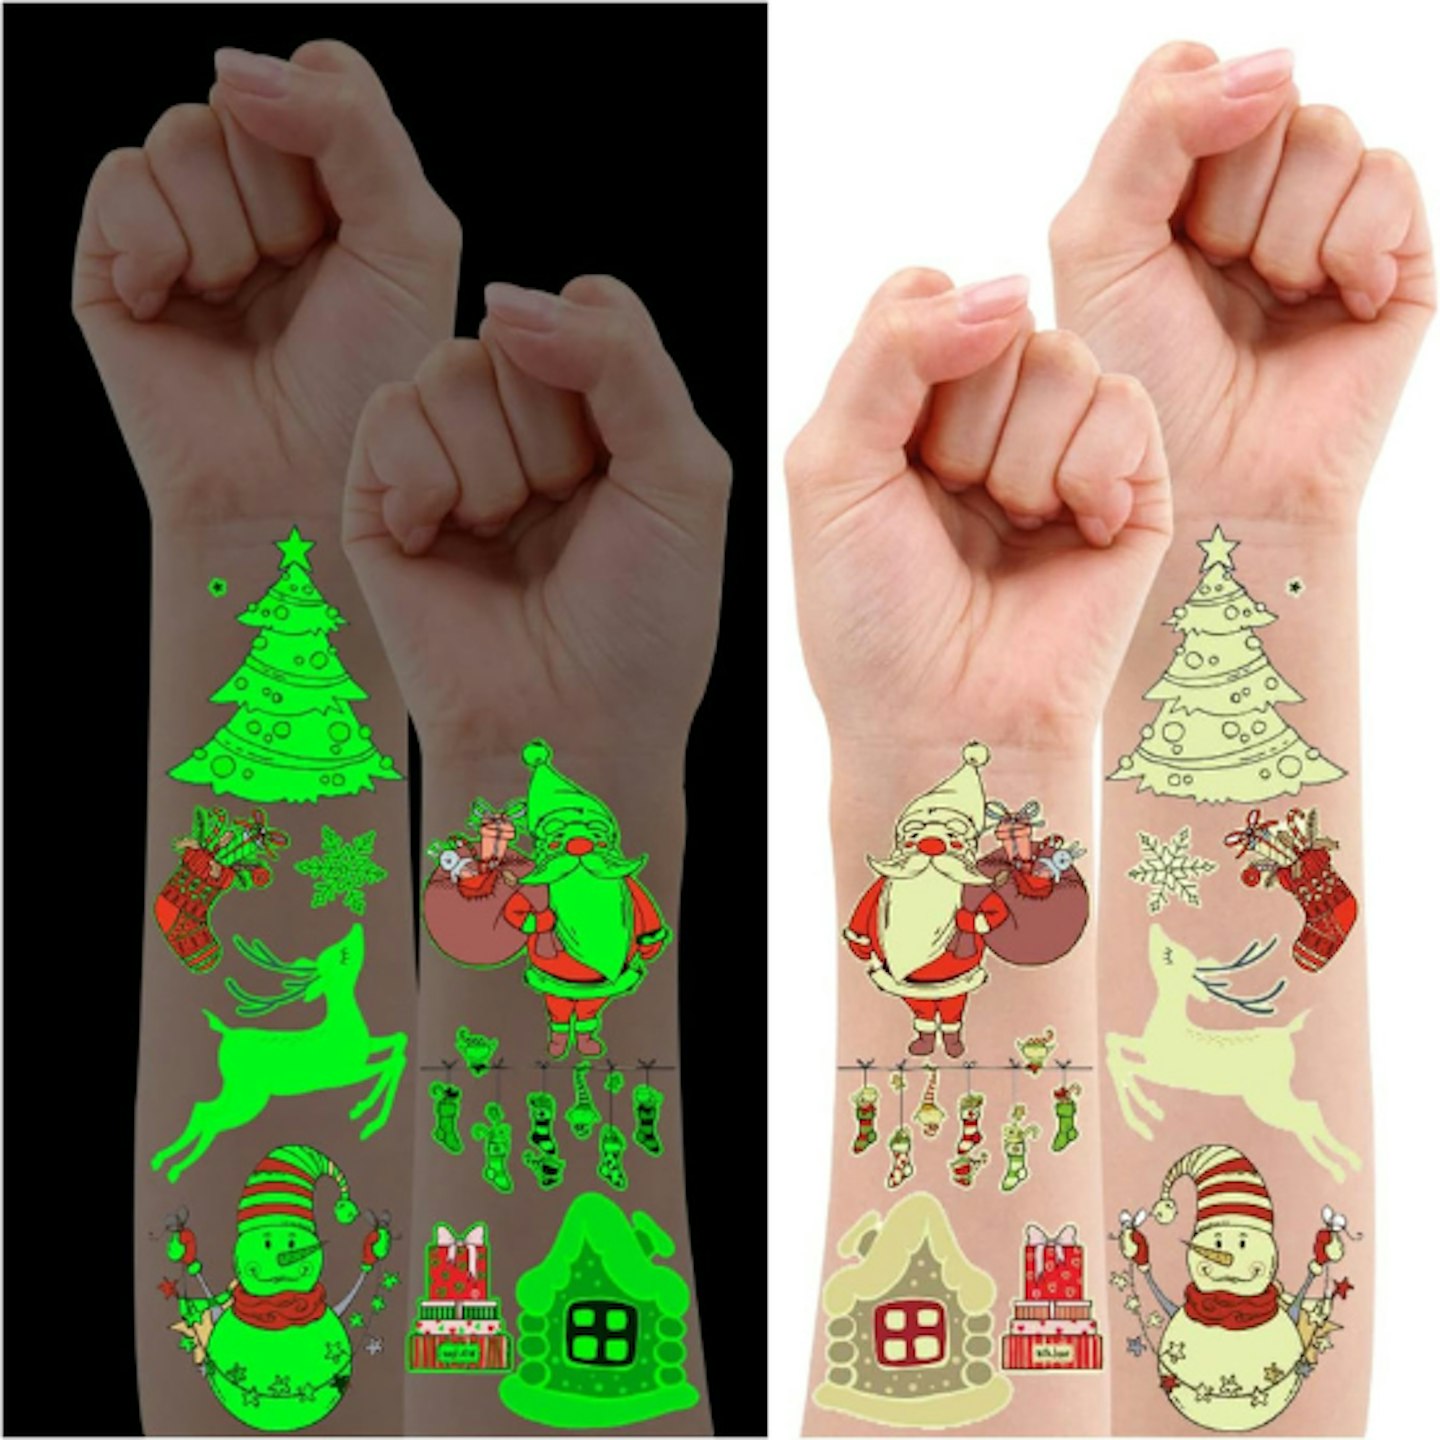 Cheap stocking fillers Christmas tattoos